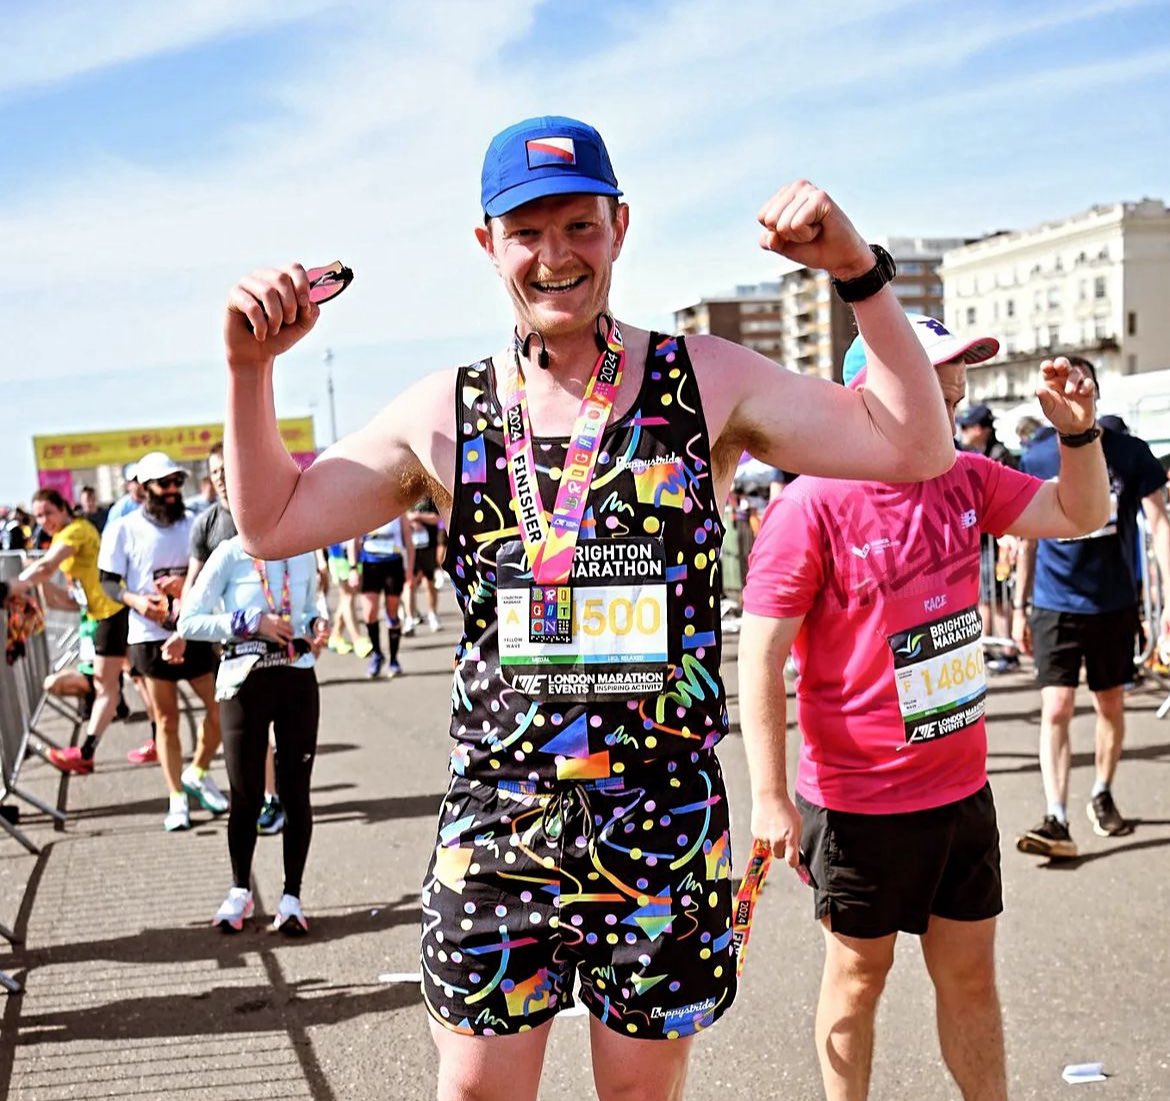 Well done Henry for smashing Brighton marathon in an epic “Retro party” vest and shorts combo 🎉 🏅 #brightonmarathon